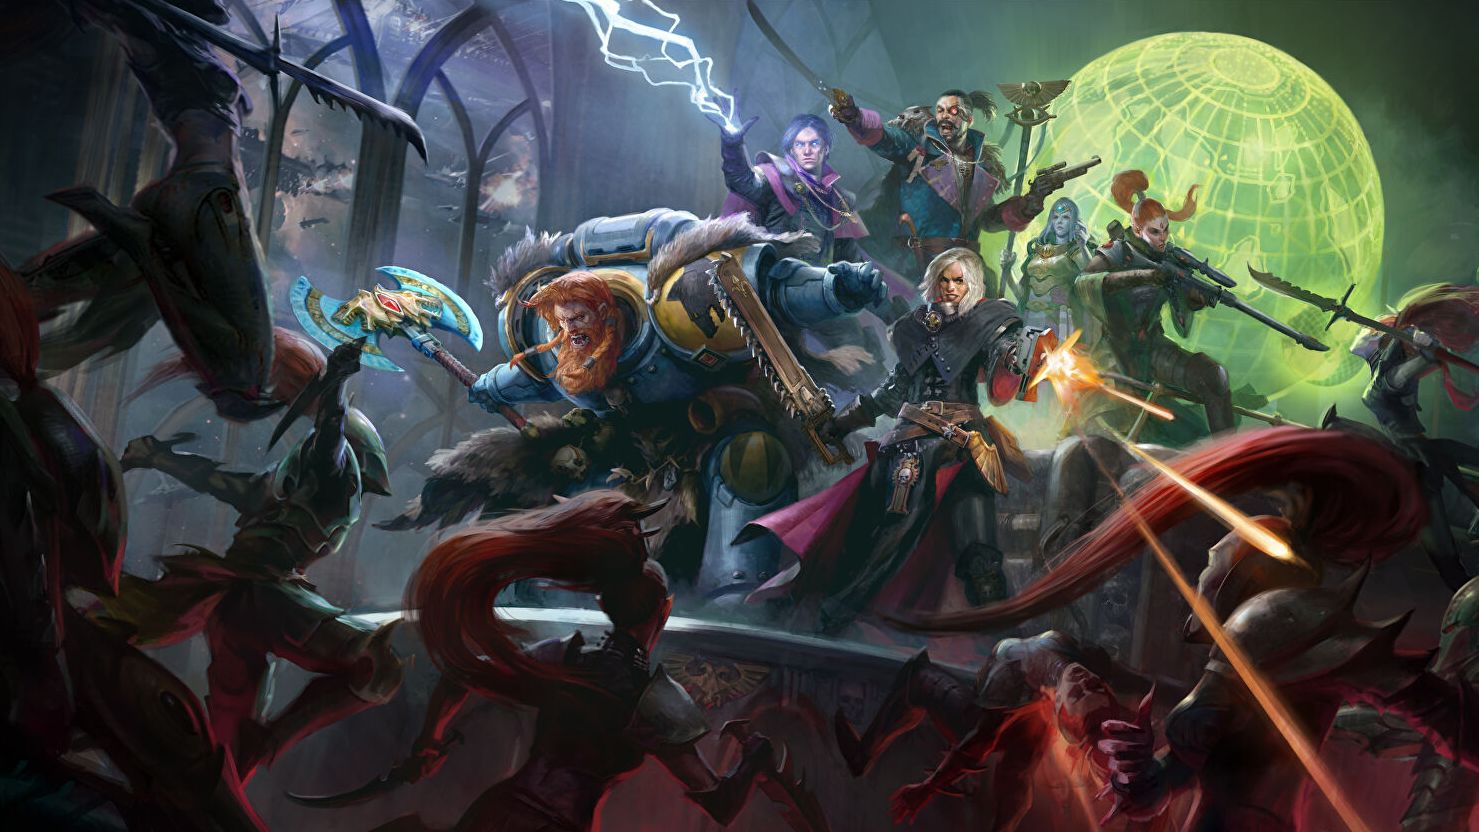 Key art from Warhammer 40k: Rogue Trader showing a group of different warriors in a firefight in space